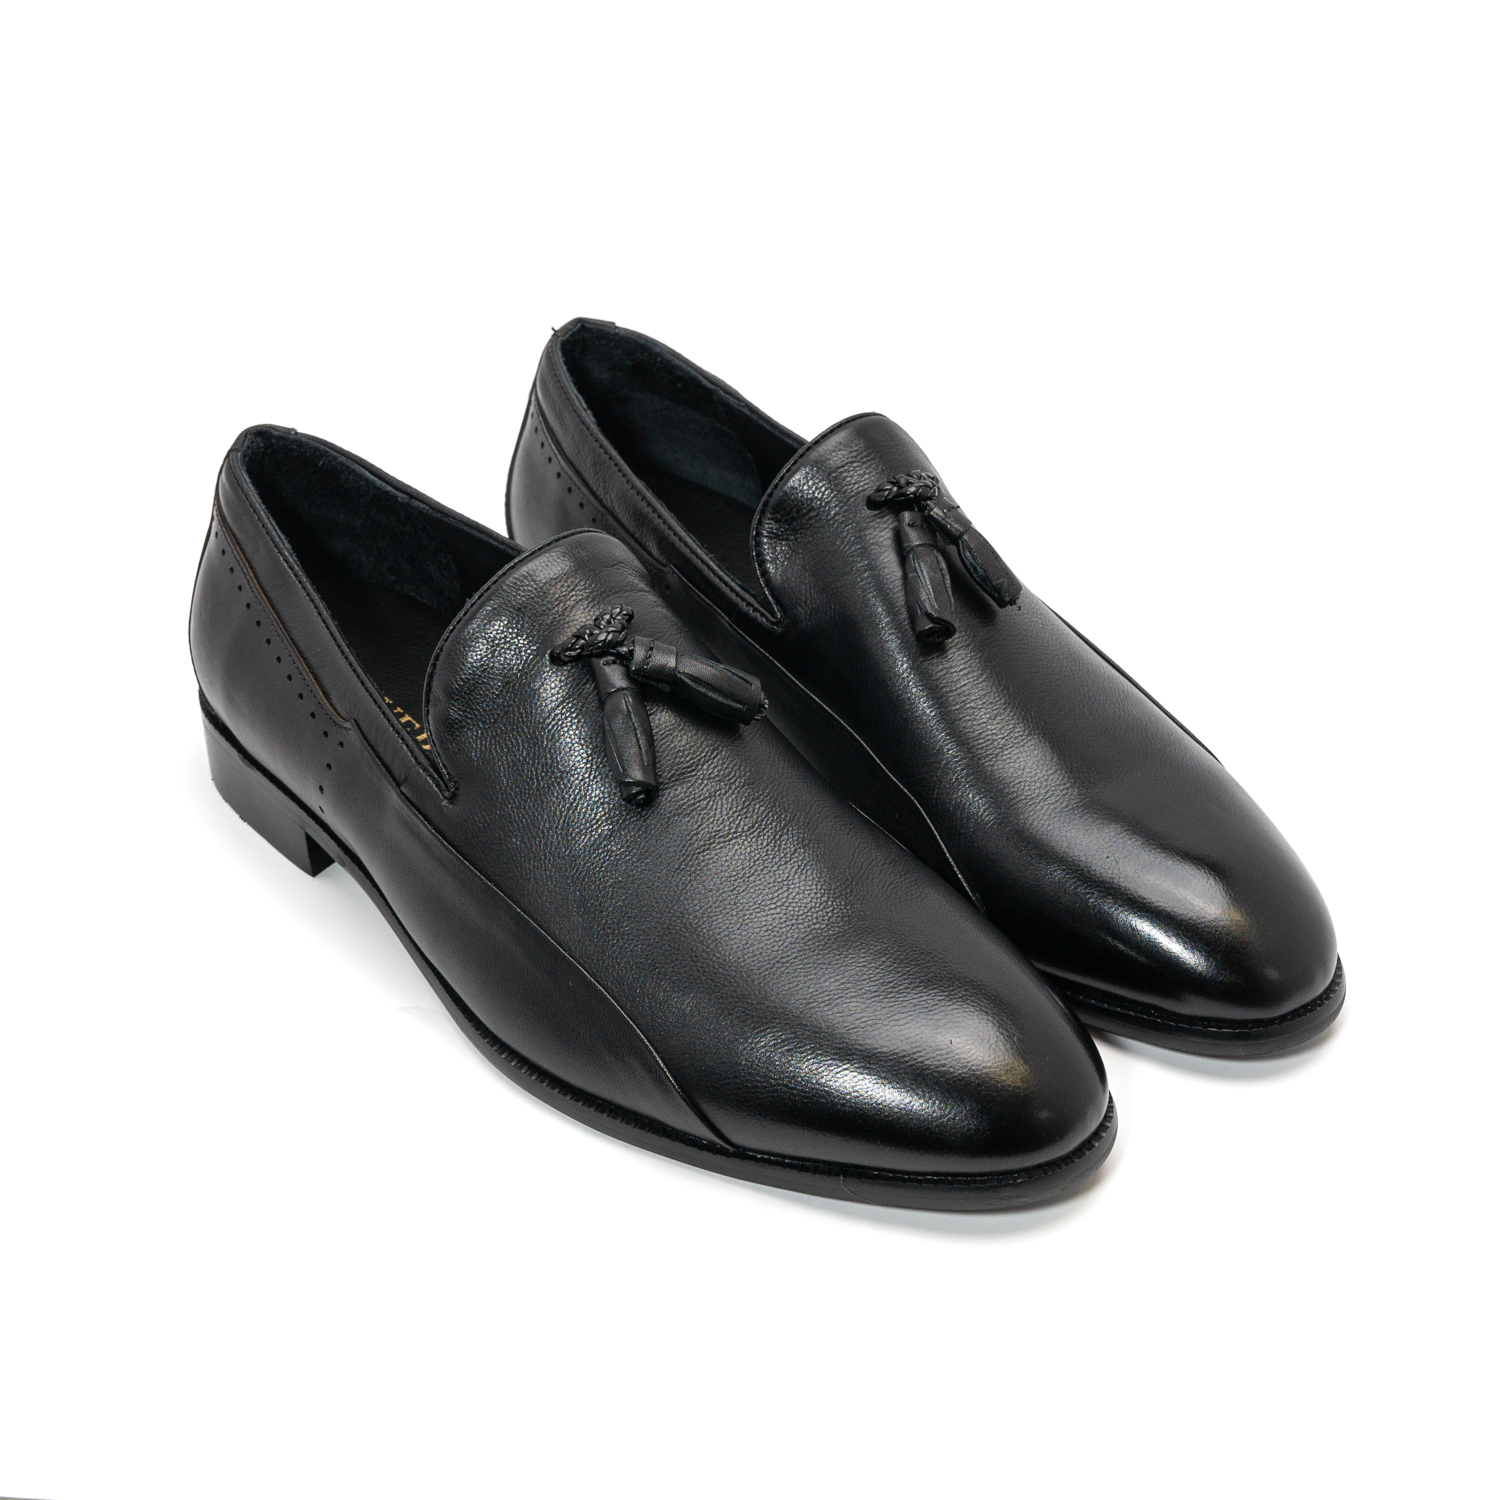 Most Comfortable Black Loafers with Tassel - Snover